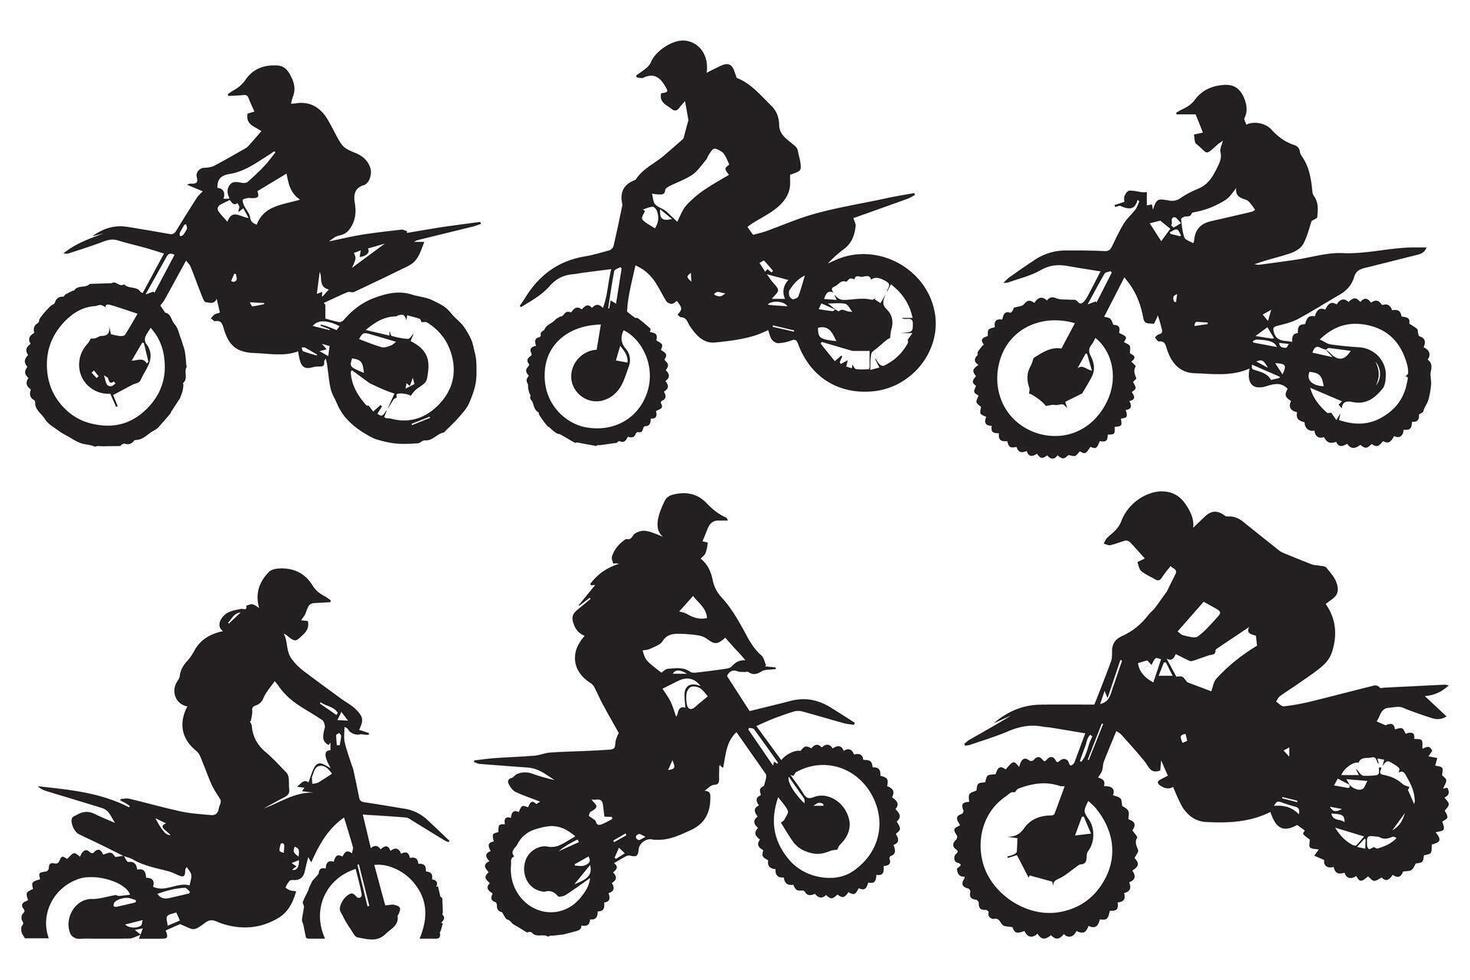 motocross jumping riders, freestyle, isolated silhouettes set pro designt vector